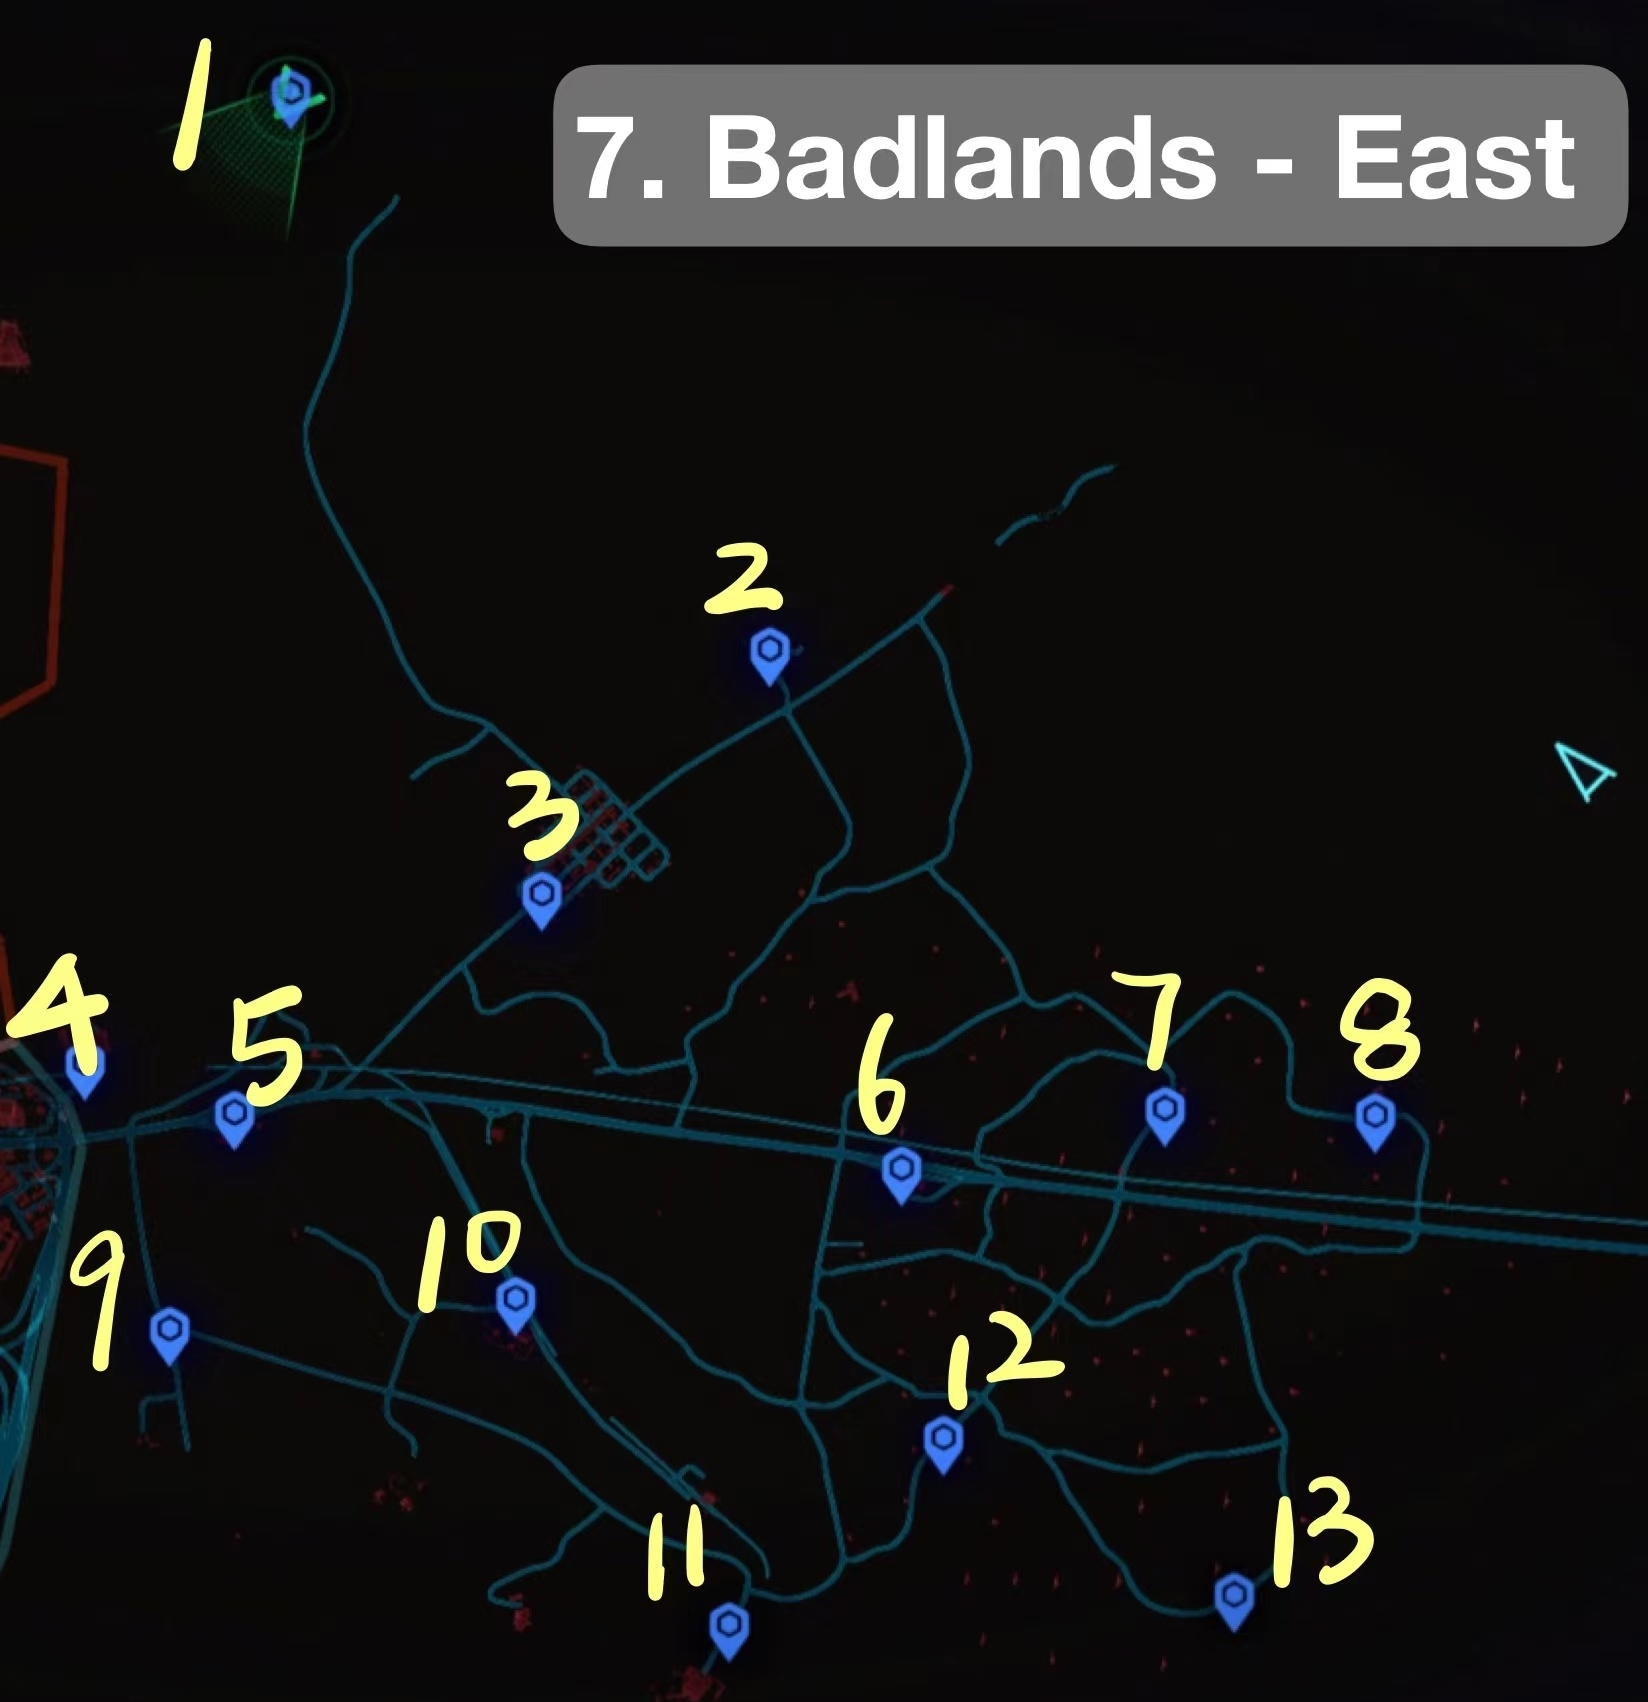 Cyberpunk 2077 Locations and names of 159 fast travel data terms Patch 1.5 - 7. 恶土-东部/East Badlands - 70772F1